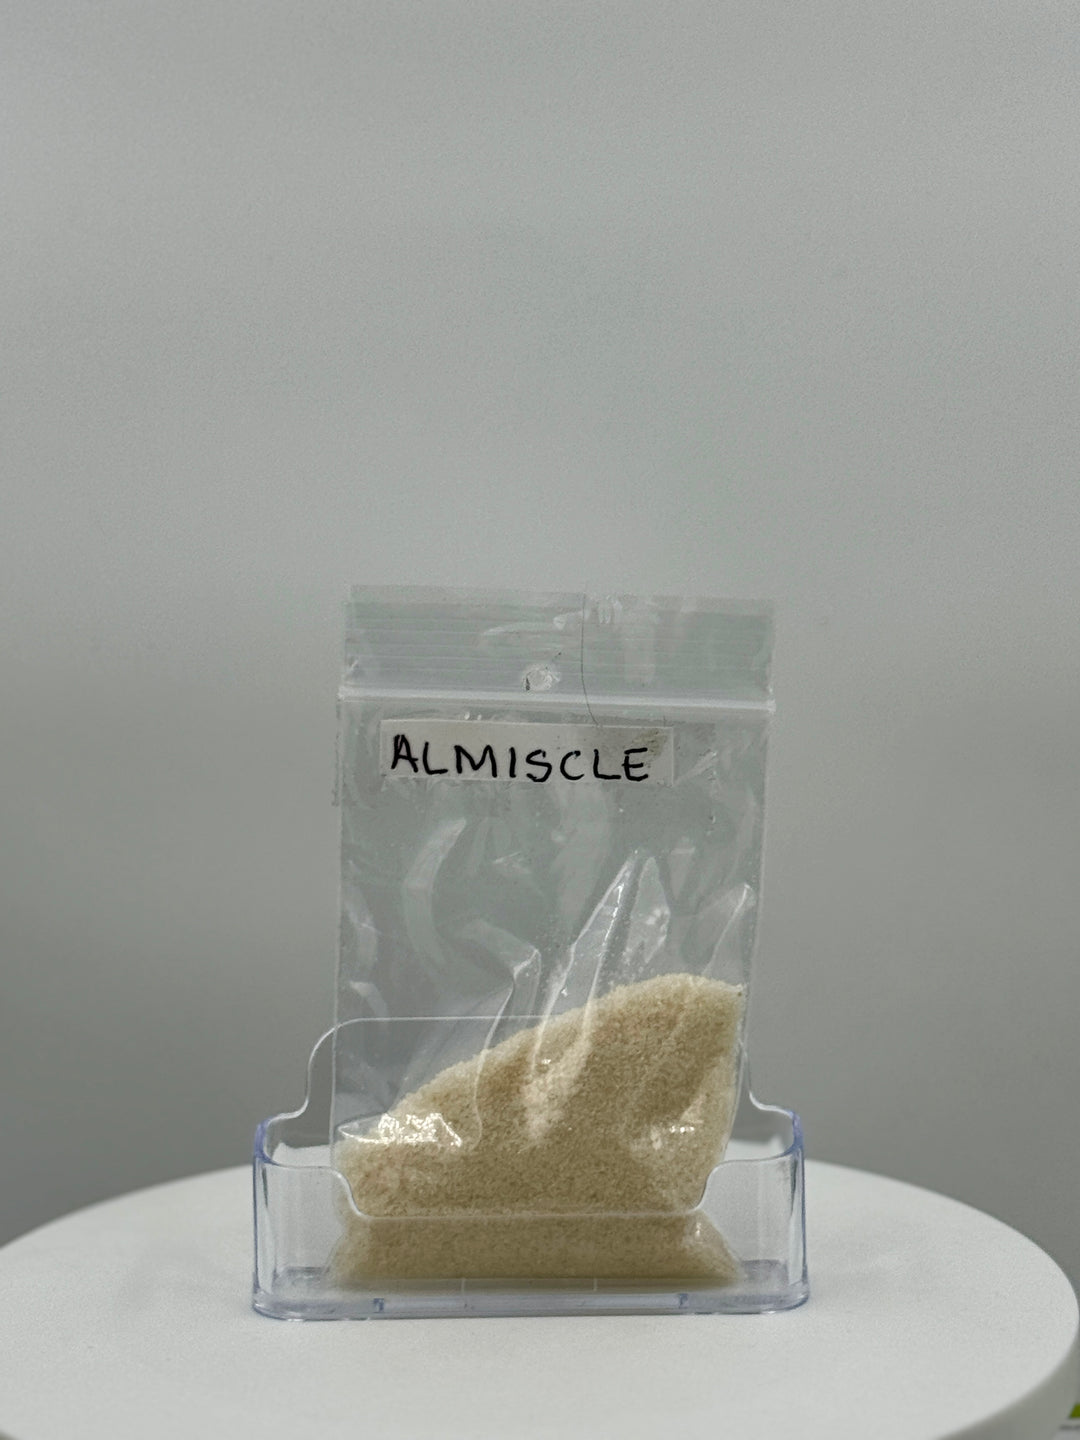 ALMISCLE (ALMISCLE)